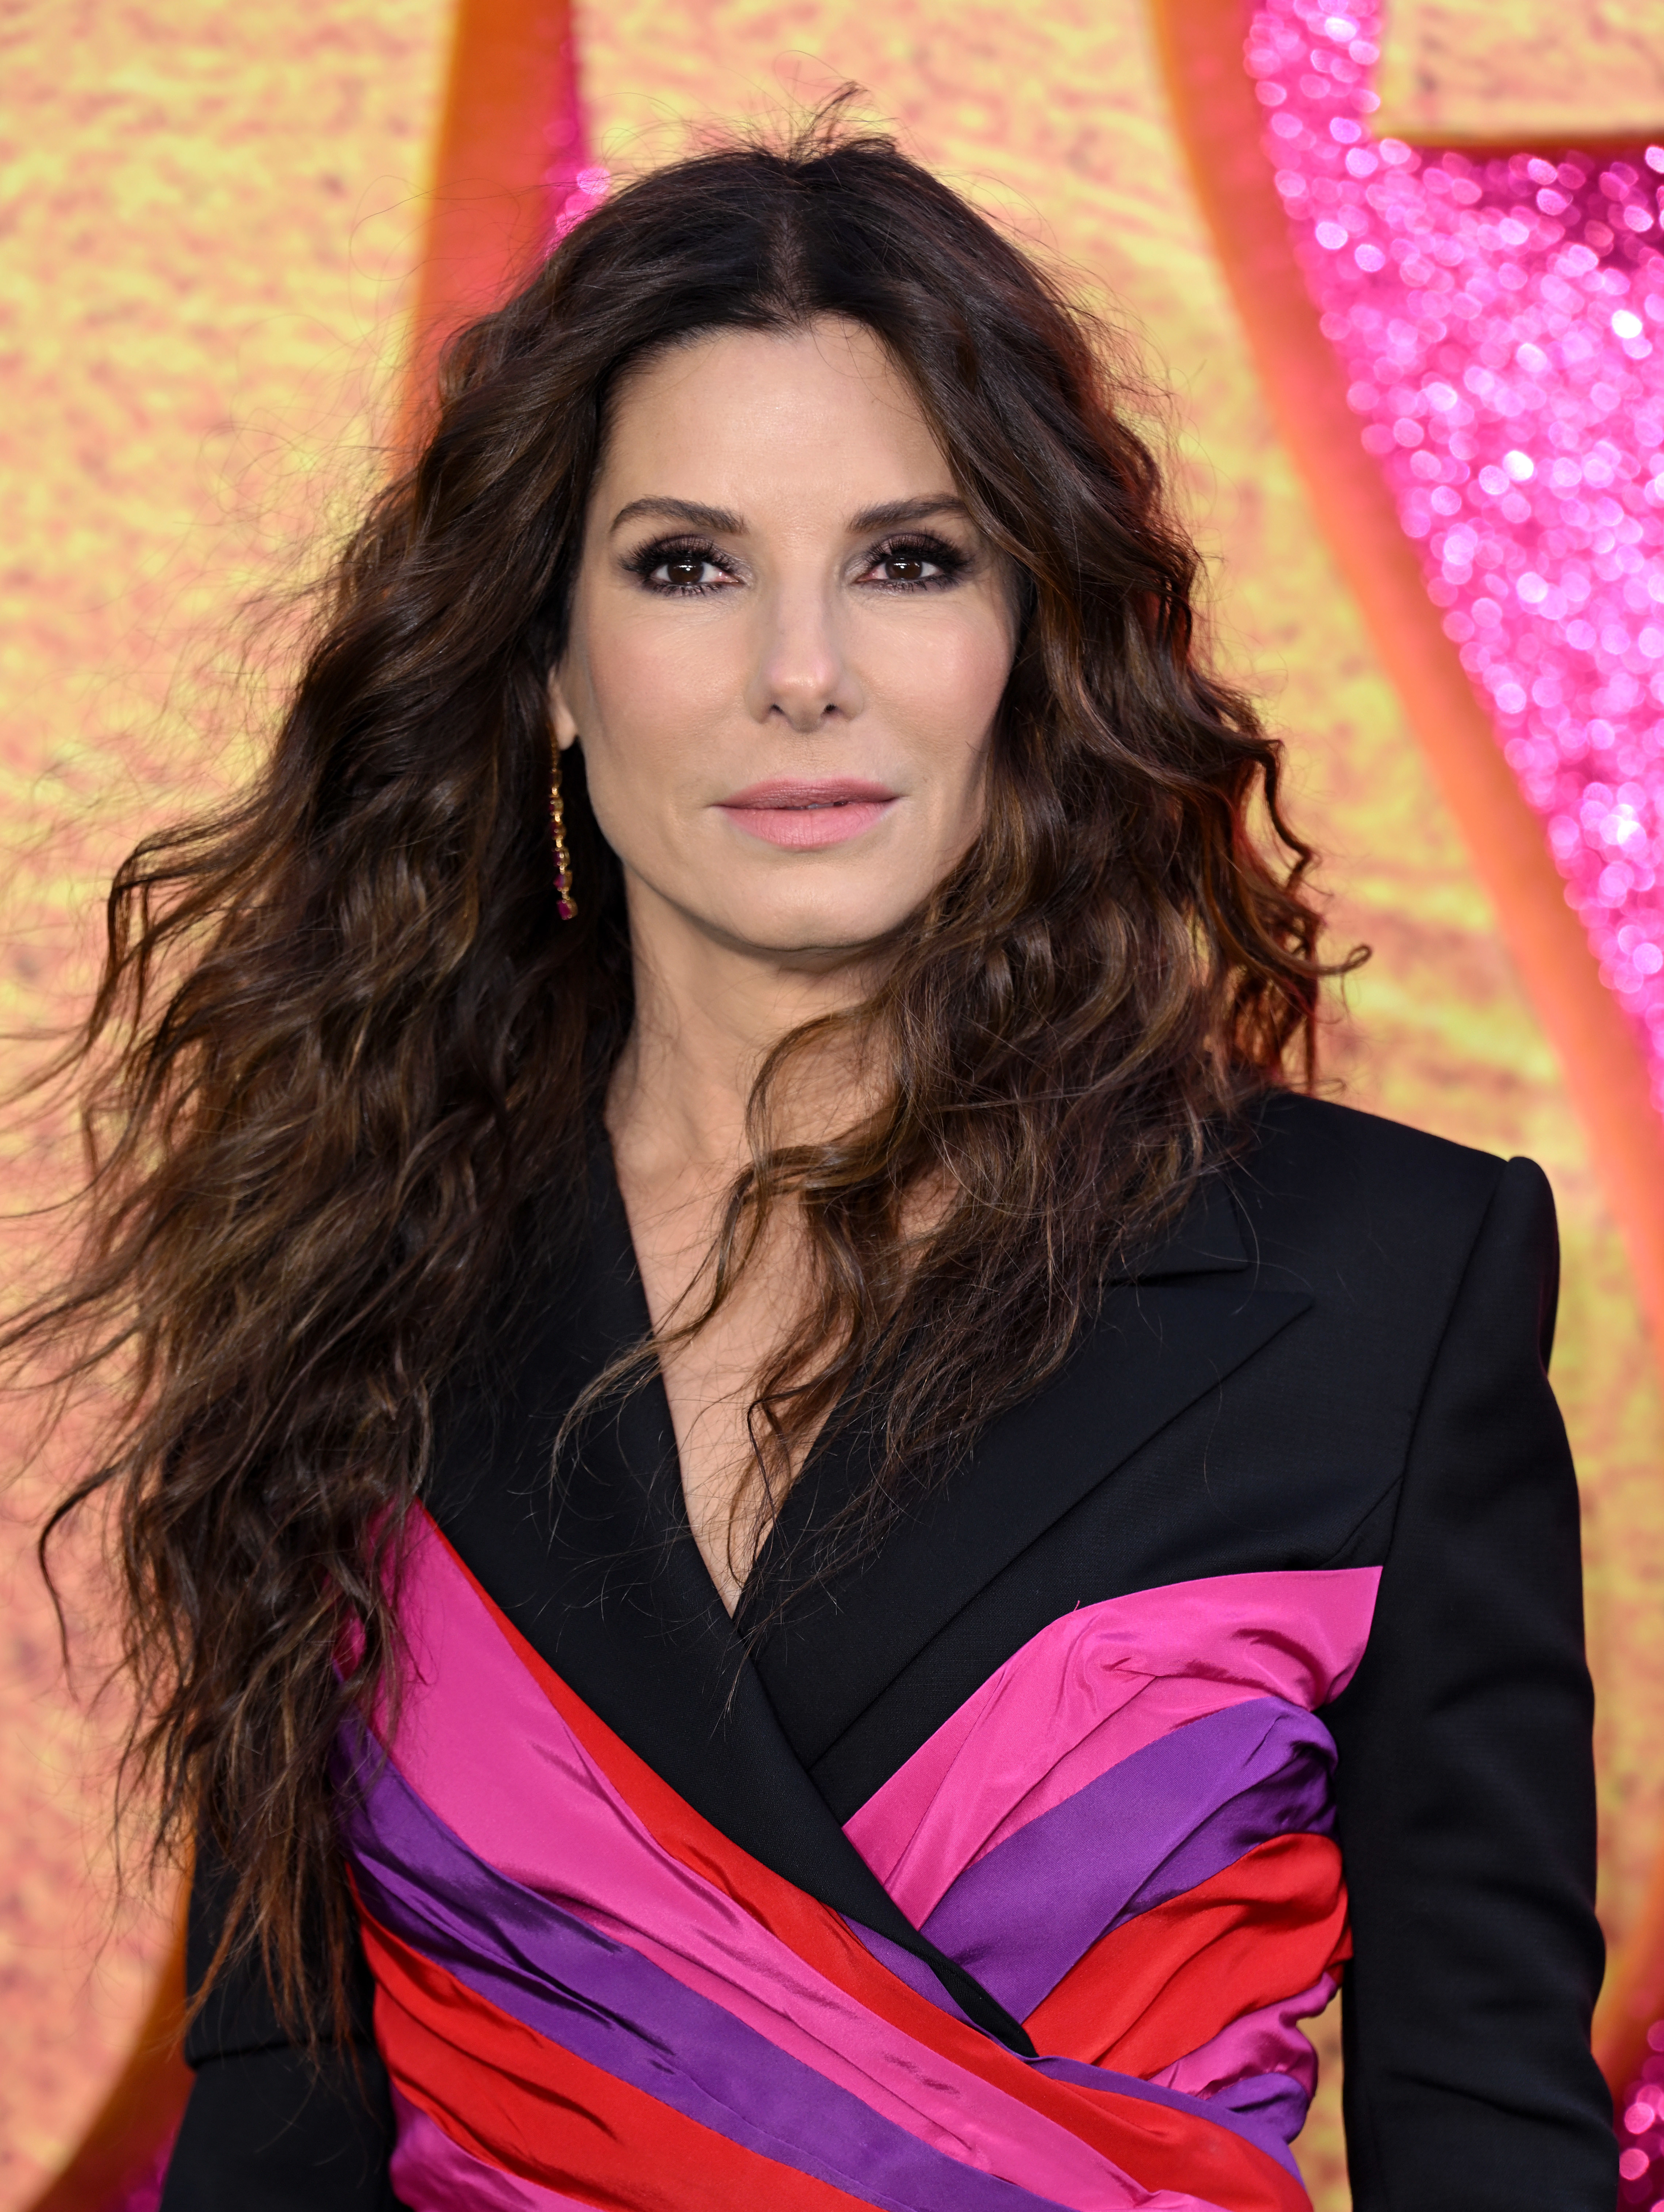 Sandra Bullock wearing a colorful criss-cross dress on the red carpet